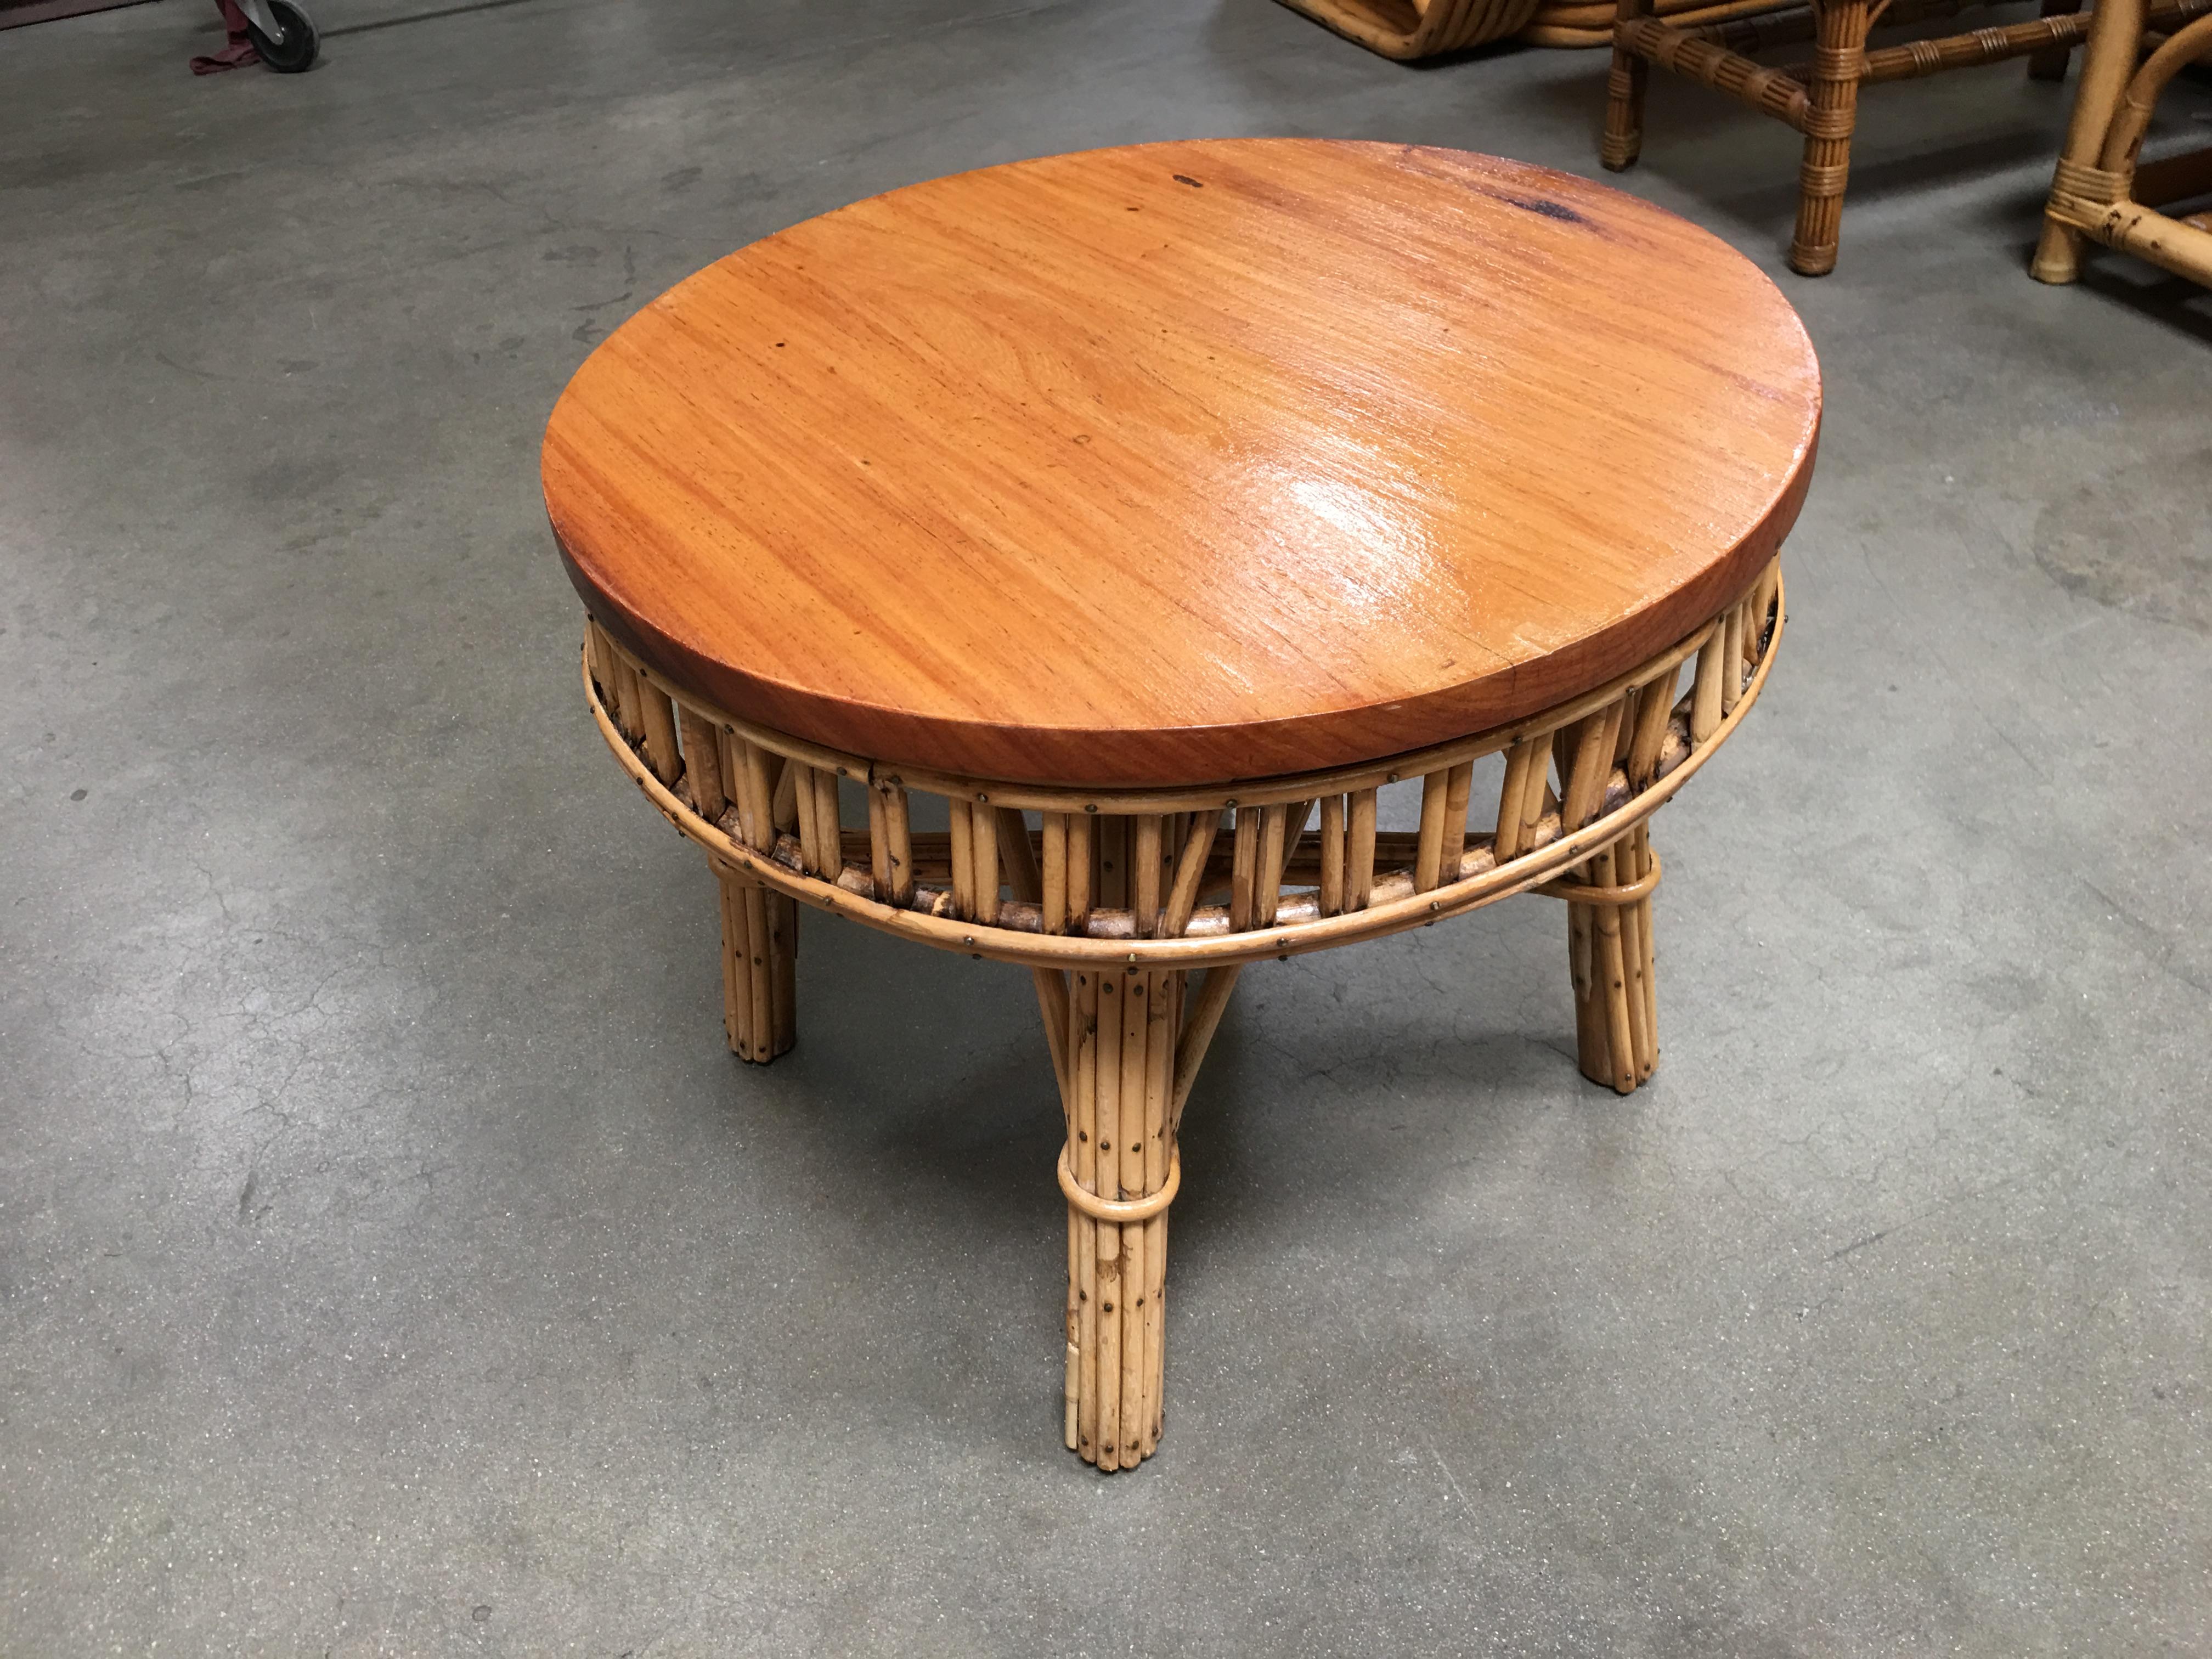 Round stick rattan coffee table with mahogany top featuring brass nail head accents, circa 194. 

Designed in the manner of Paul Frankl.

Restored to new for you.

All rattan, bamboo and wicker furniture has been painstakingly refurbished to the